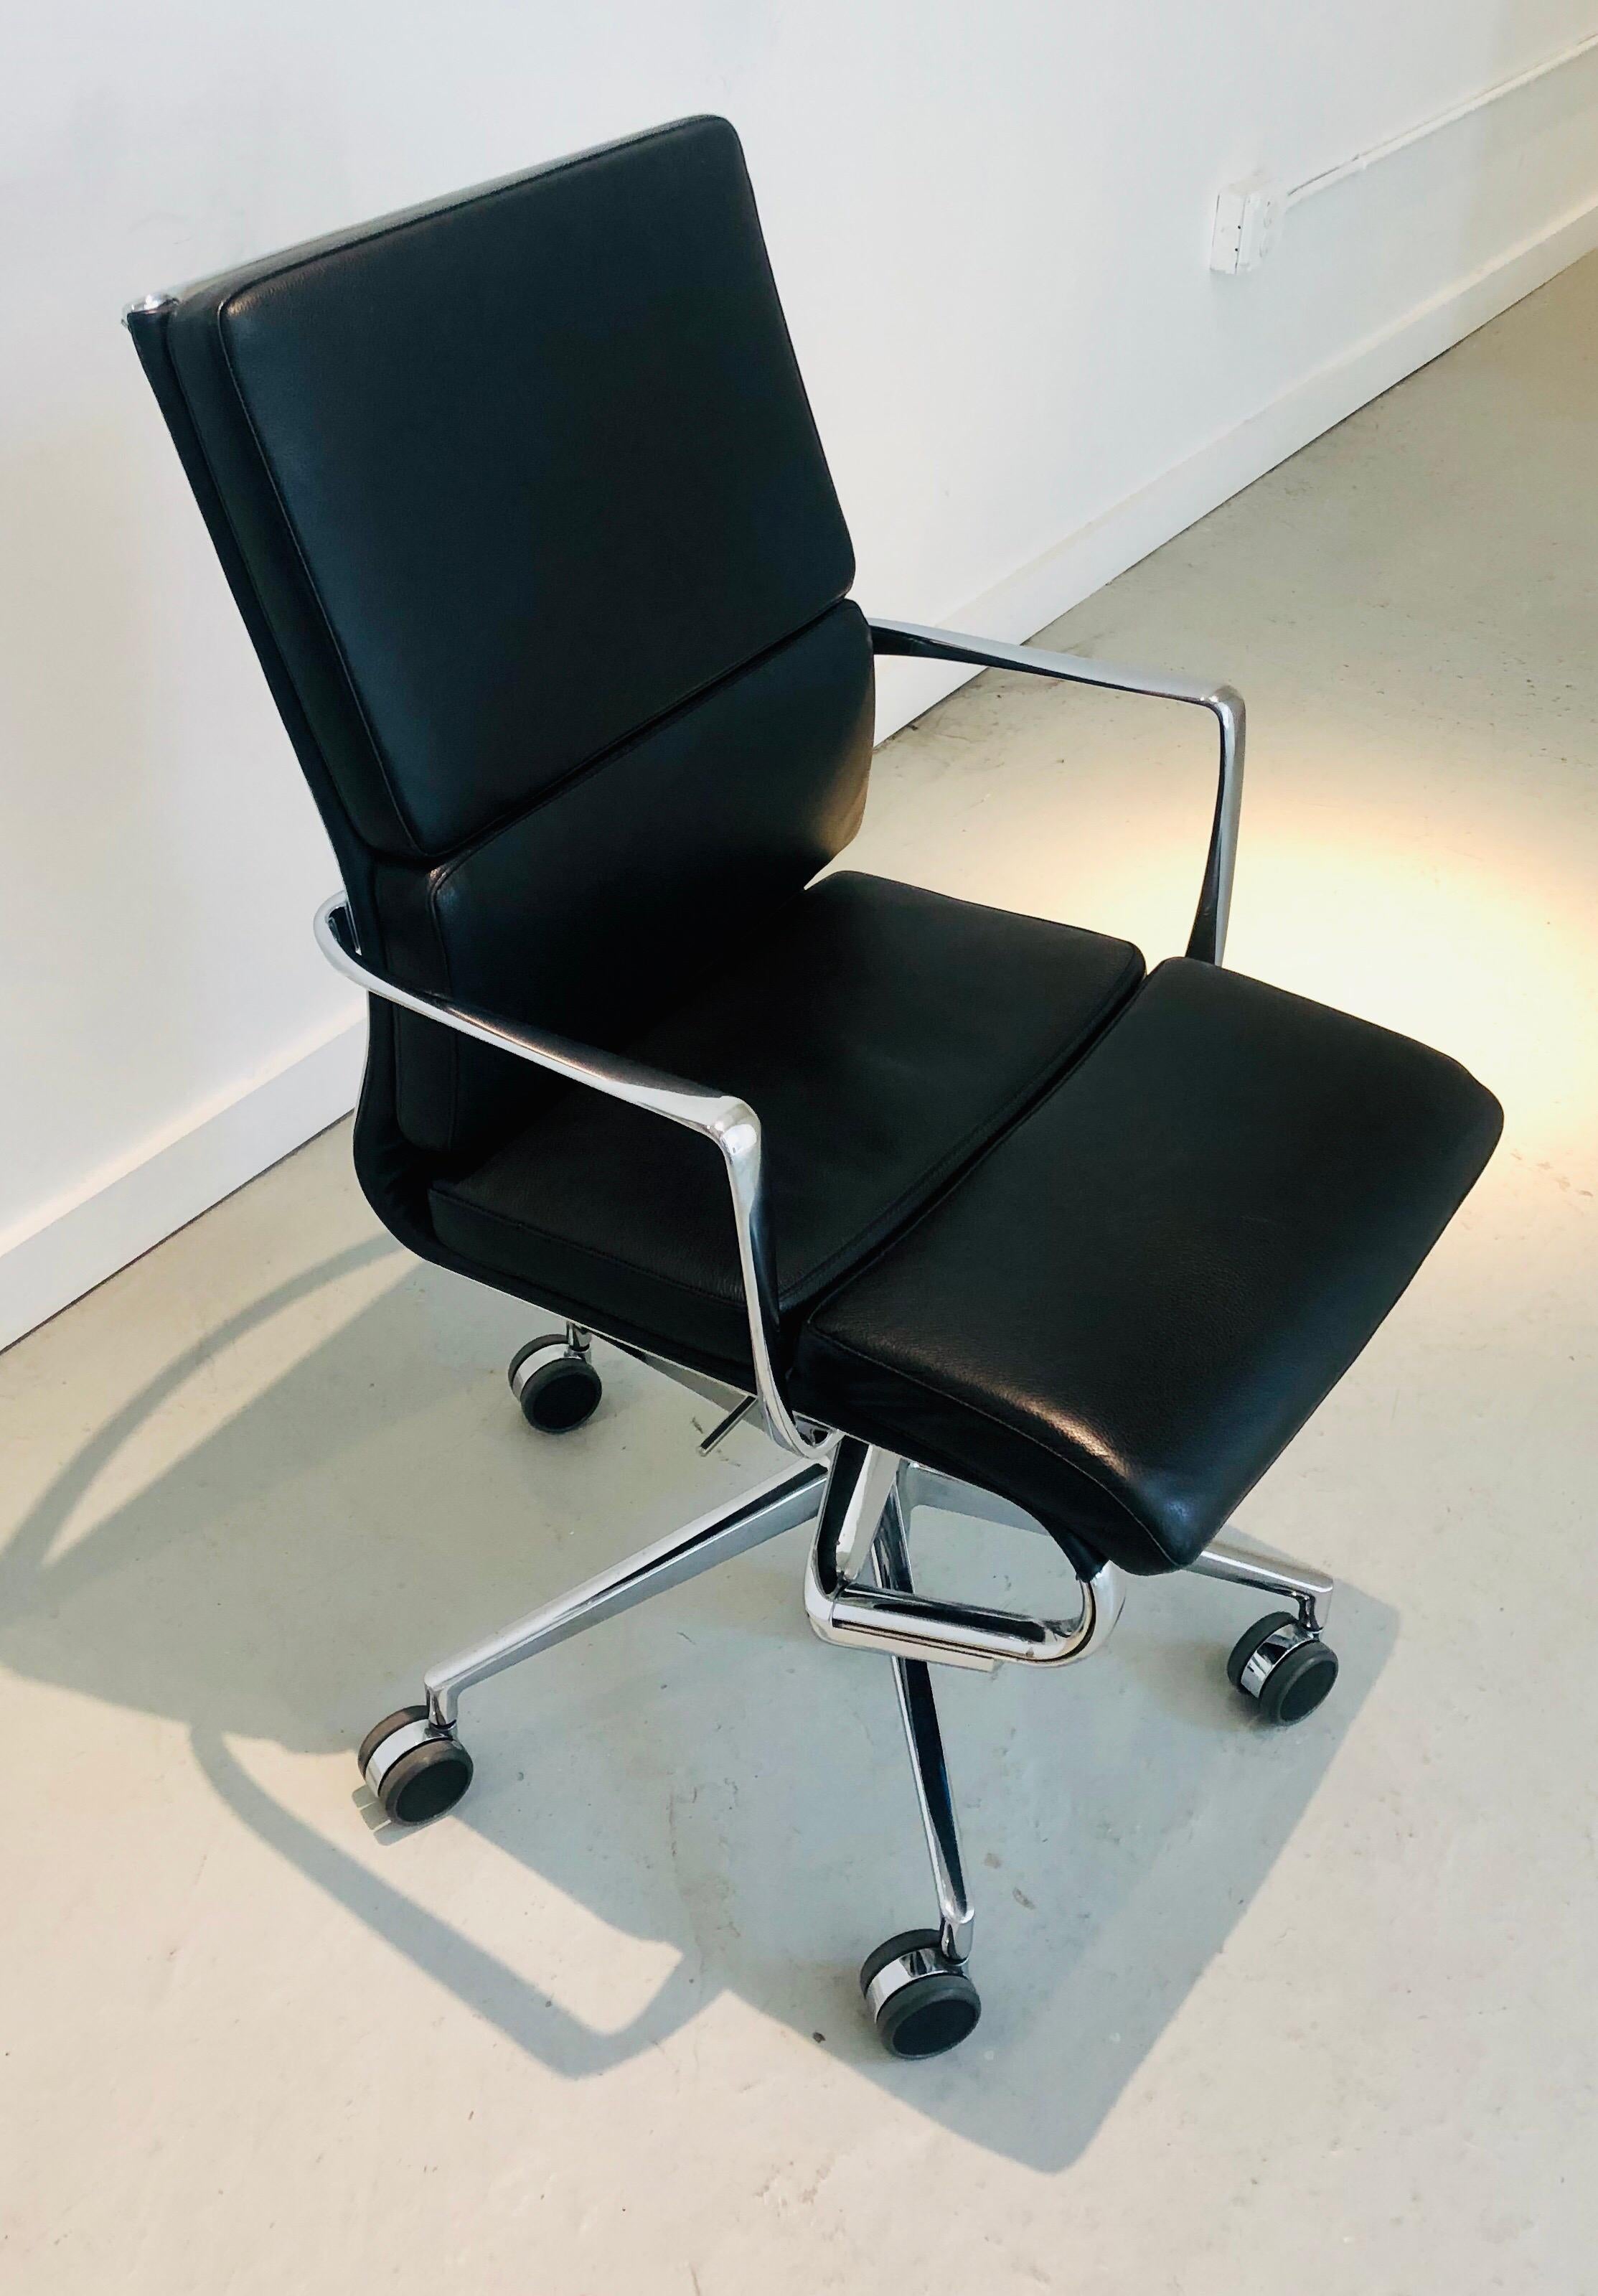 Contemporary Modern Black Office Chair - Rolling Swivel with Arms by Alberto Meda - Alias